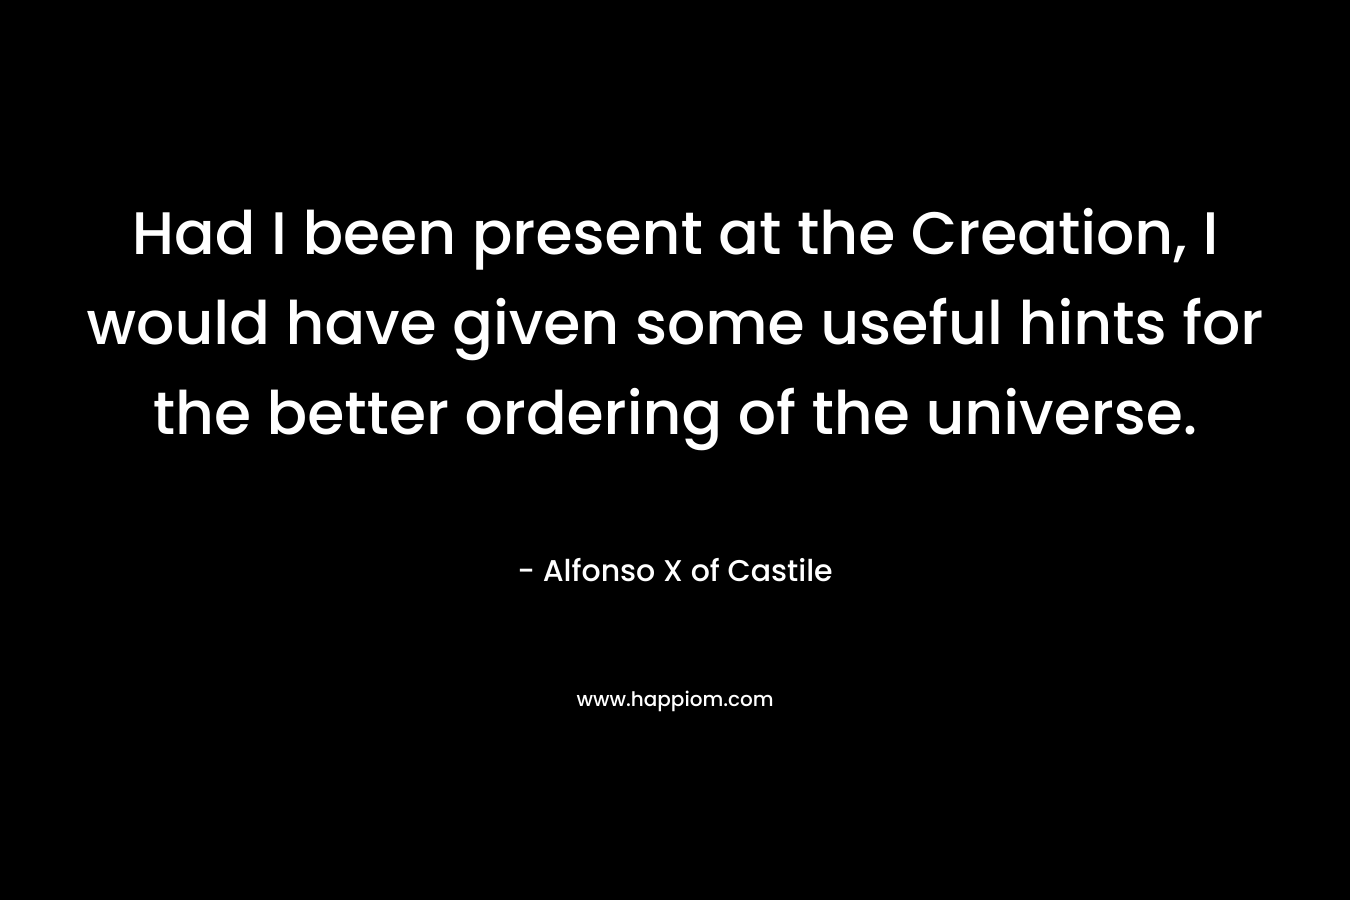 Had I been present at the Creation, I would have given some useful hints for the better ordering of the universe.